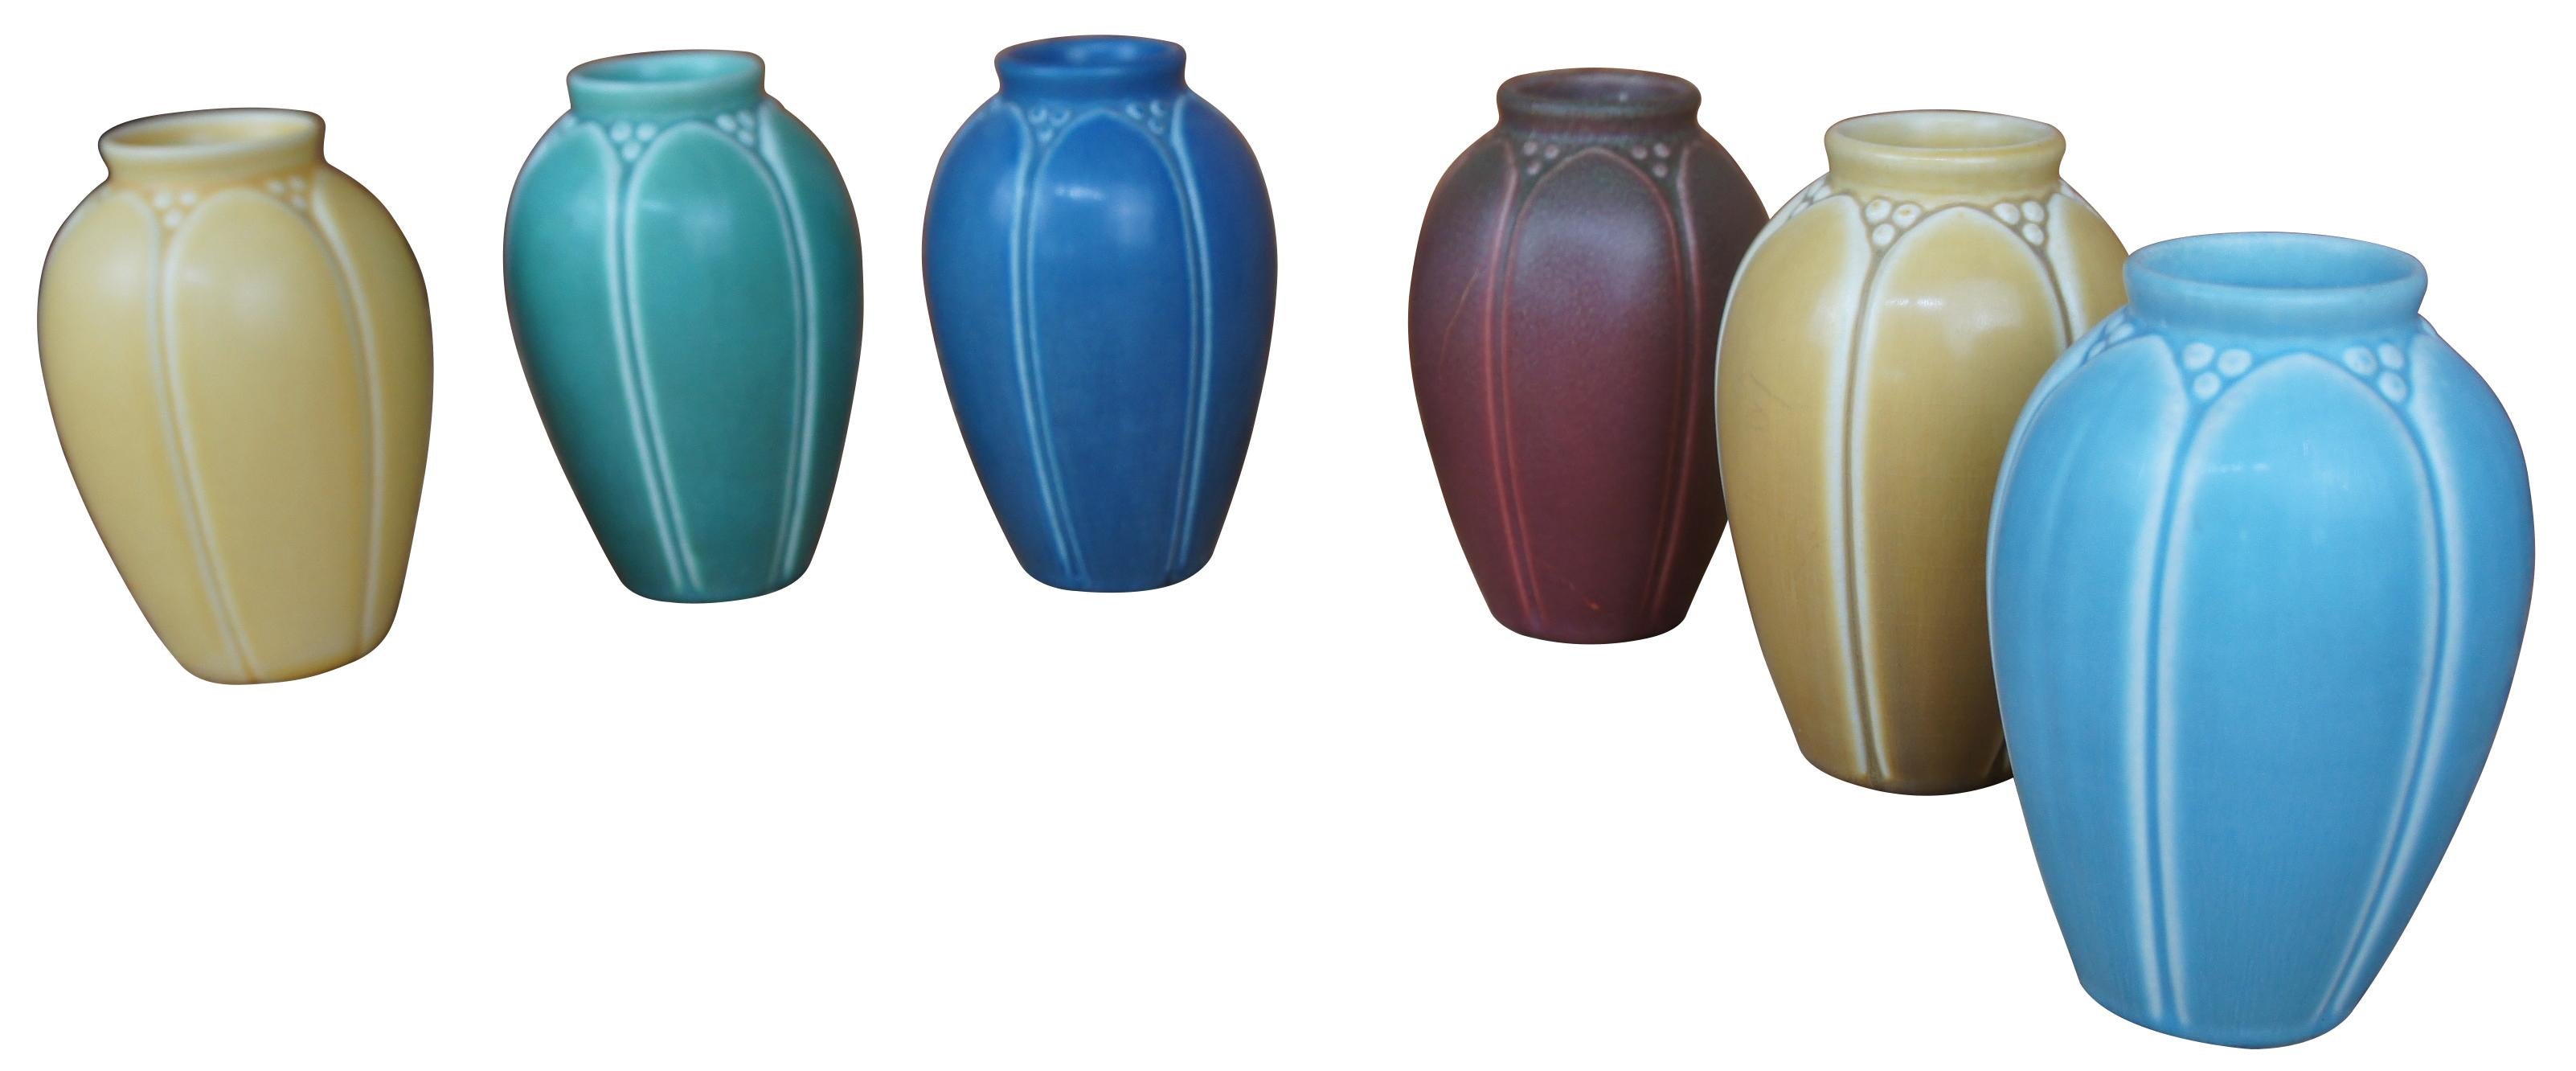 Six antique Rookwood vases in a rainbow of colors showing Victorian arts and crafts styling with matte glaze. Vases marked on base, 1917, 1921, 1923, 1928, and two marks were covered by glaze. Measure:6